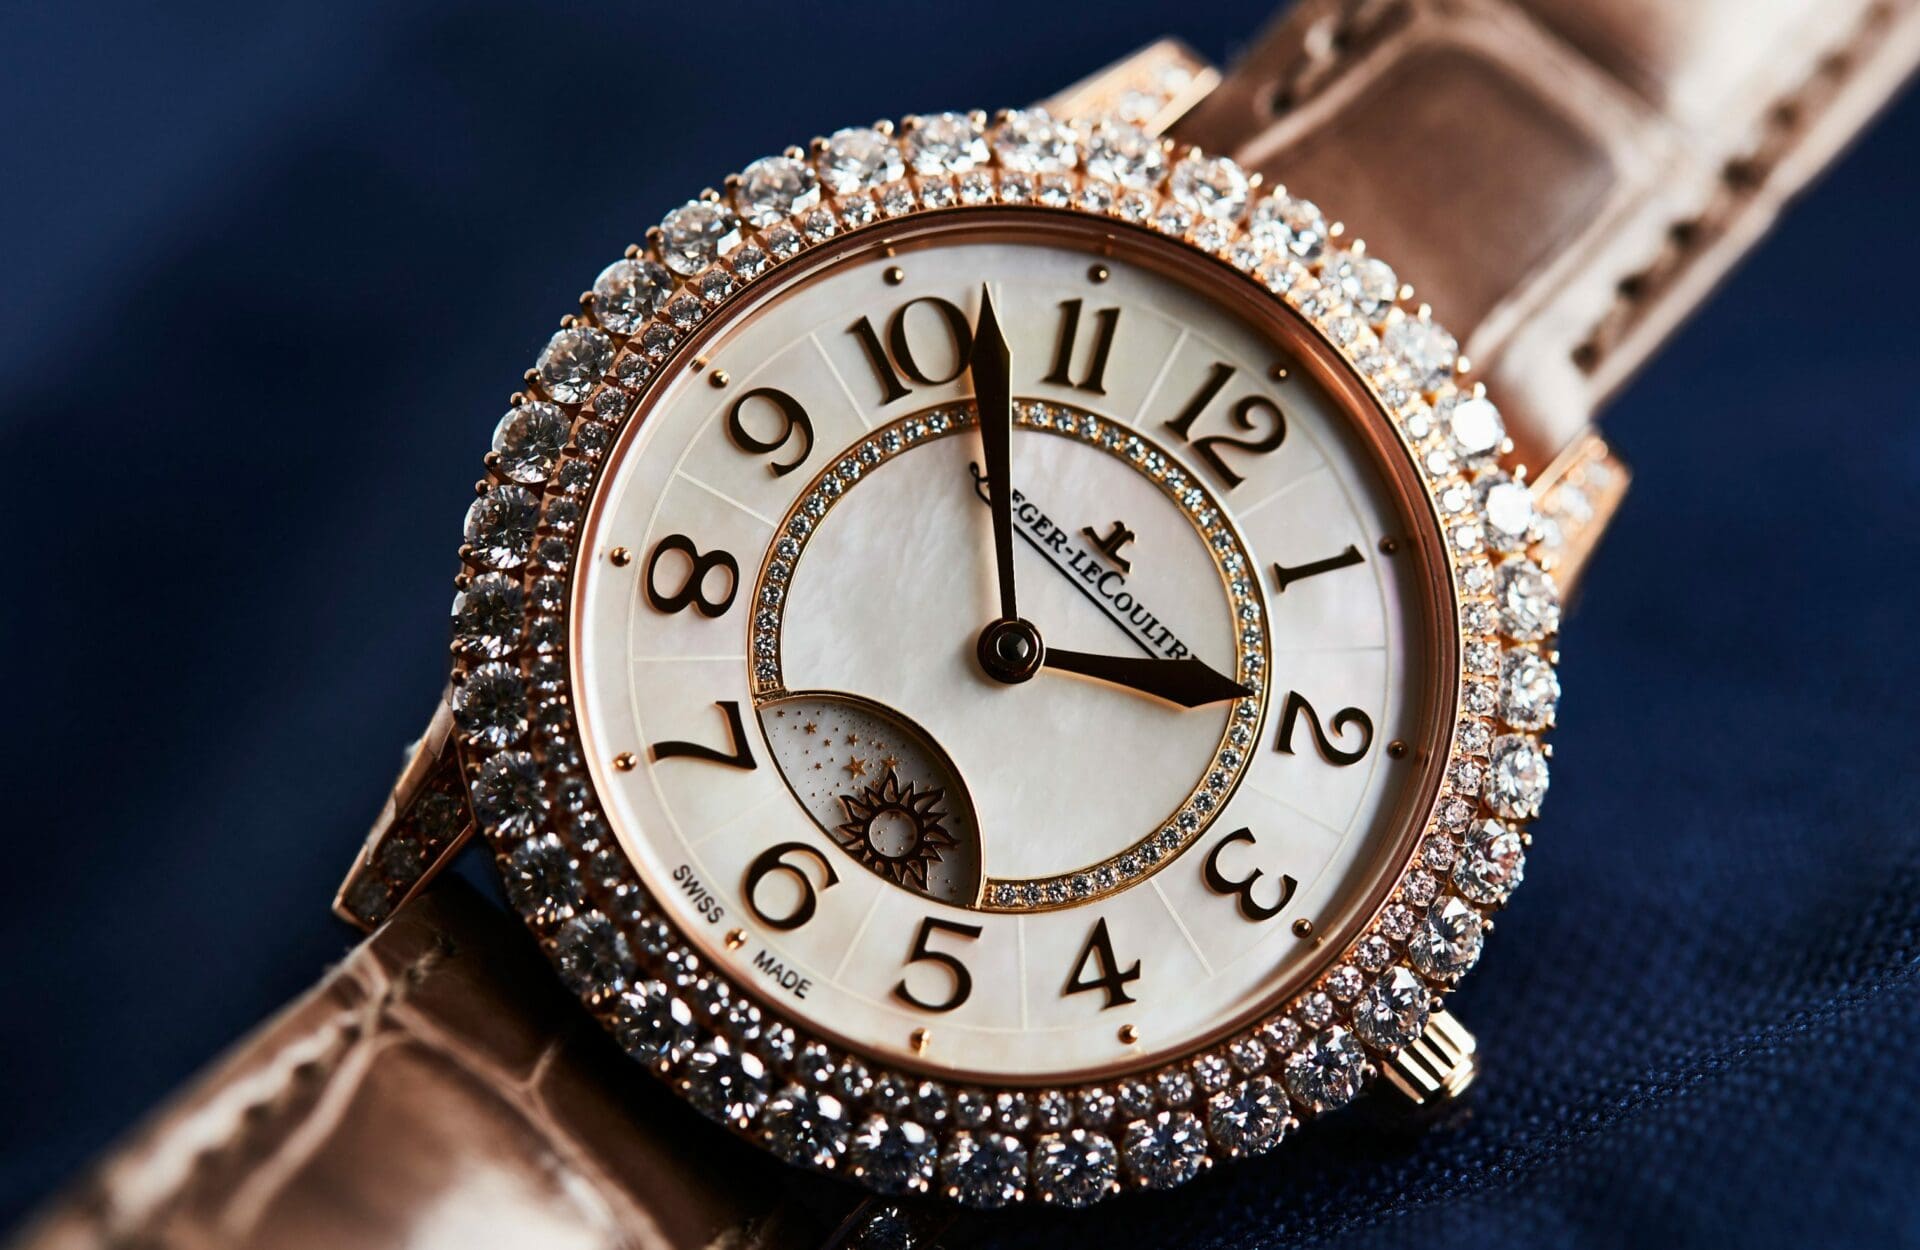 These are some of the best women’s watches money can buy